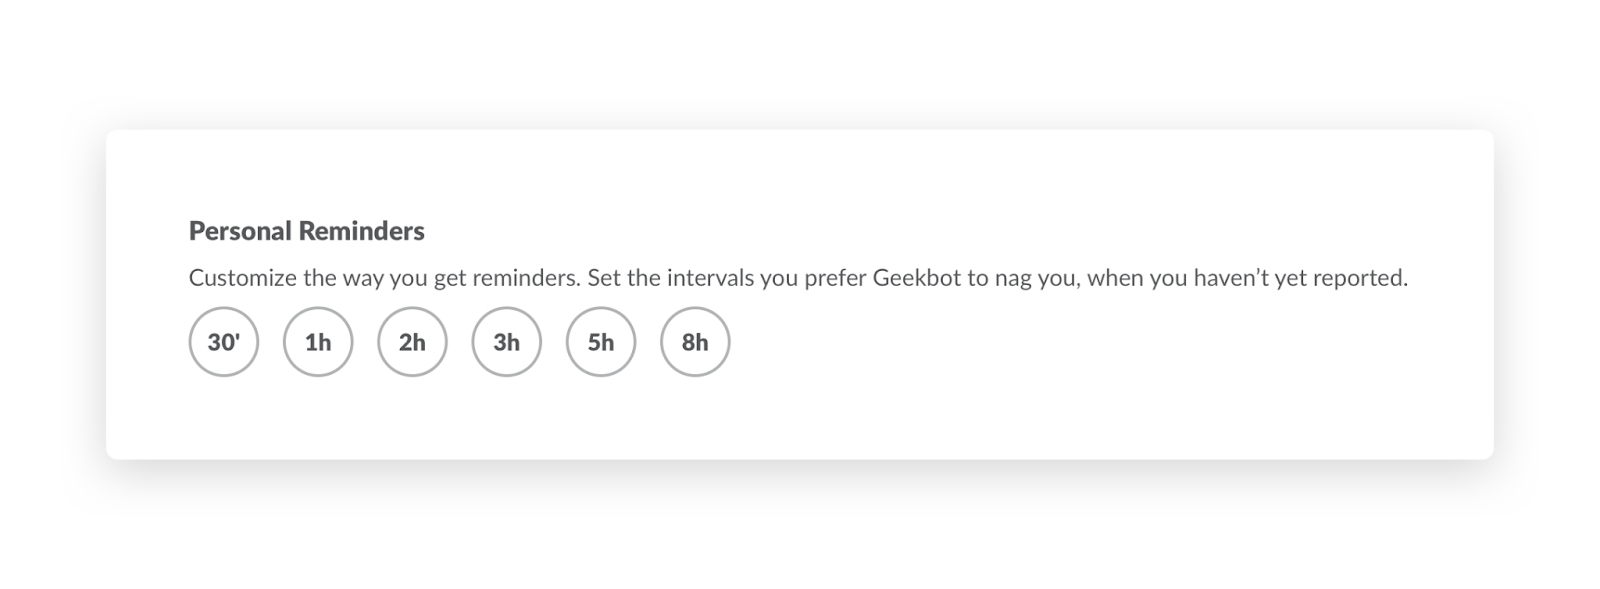 Personal Reminders: Customize the way you get reminders in Geekbot